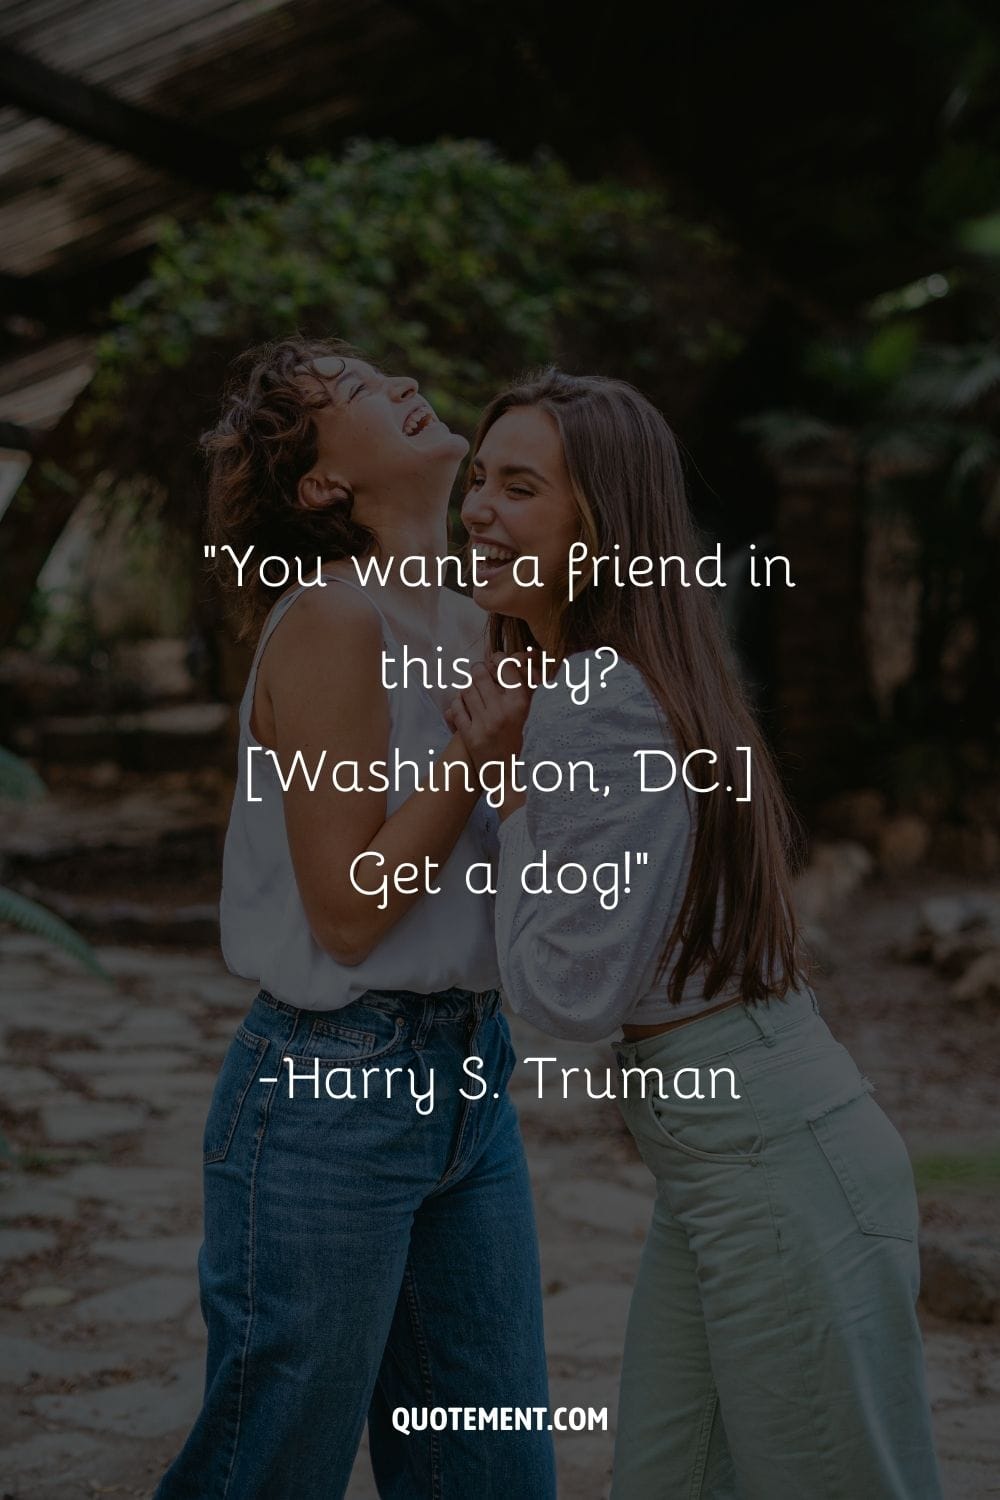 “You want a friend in this city [Washington, DC.] Get a dog!” ― Harry S. Truman